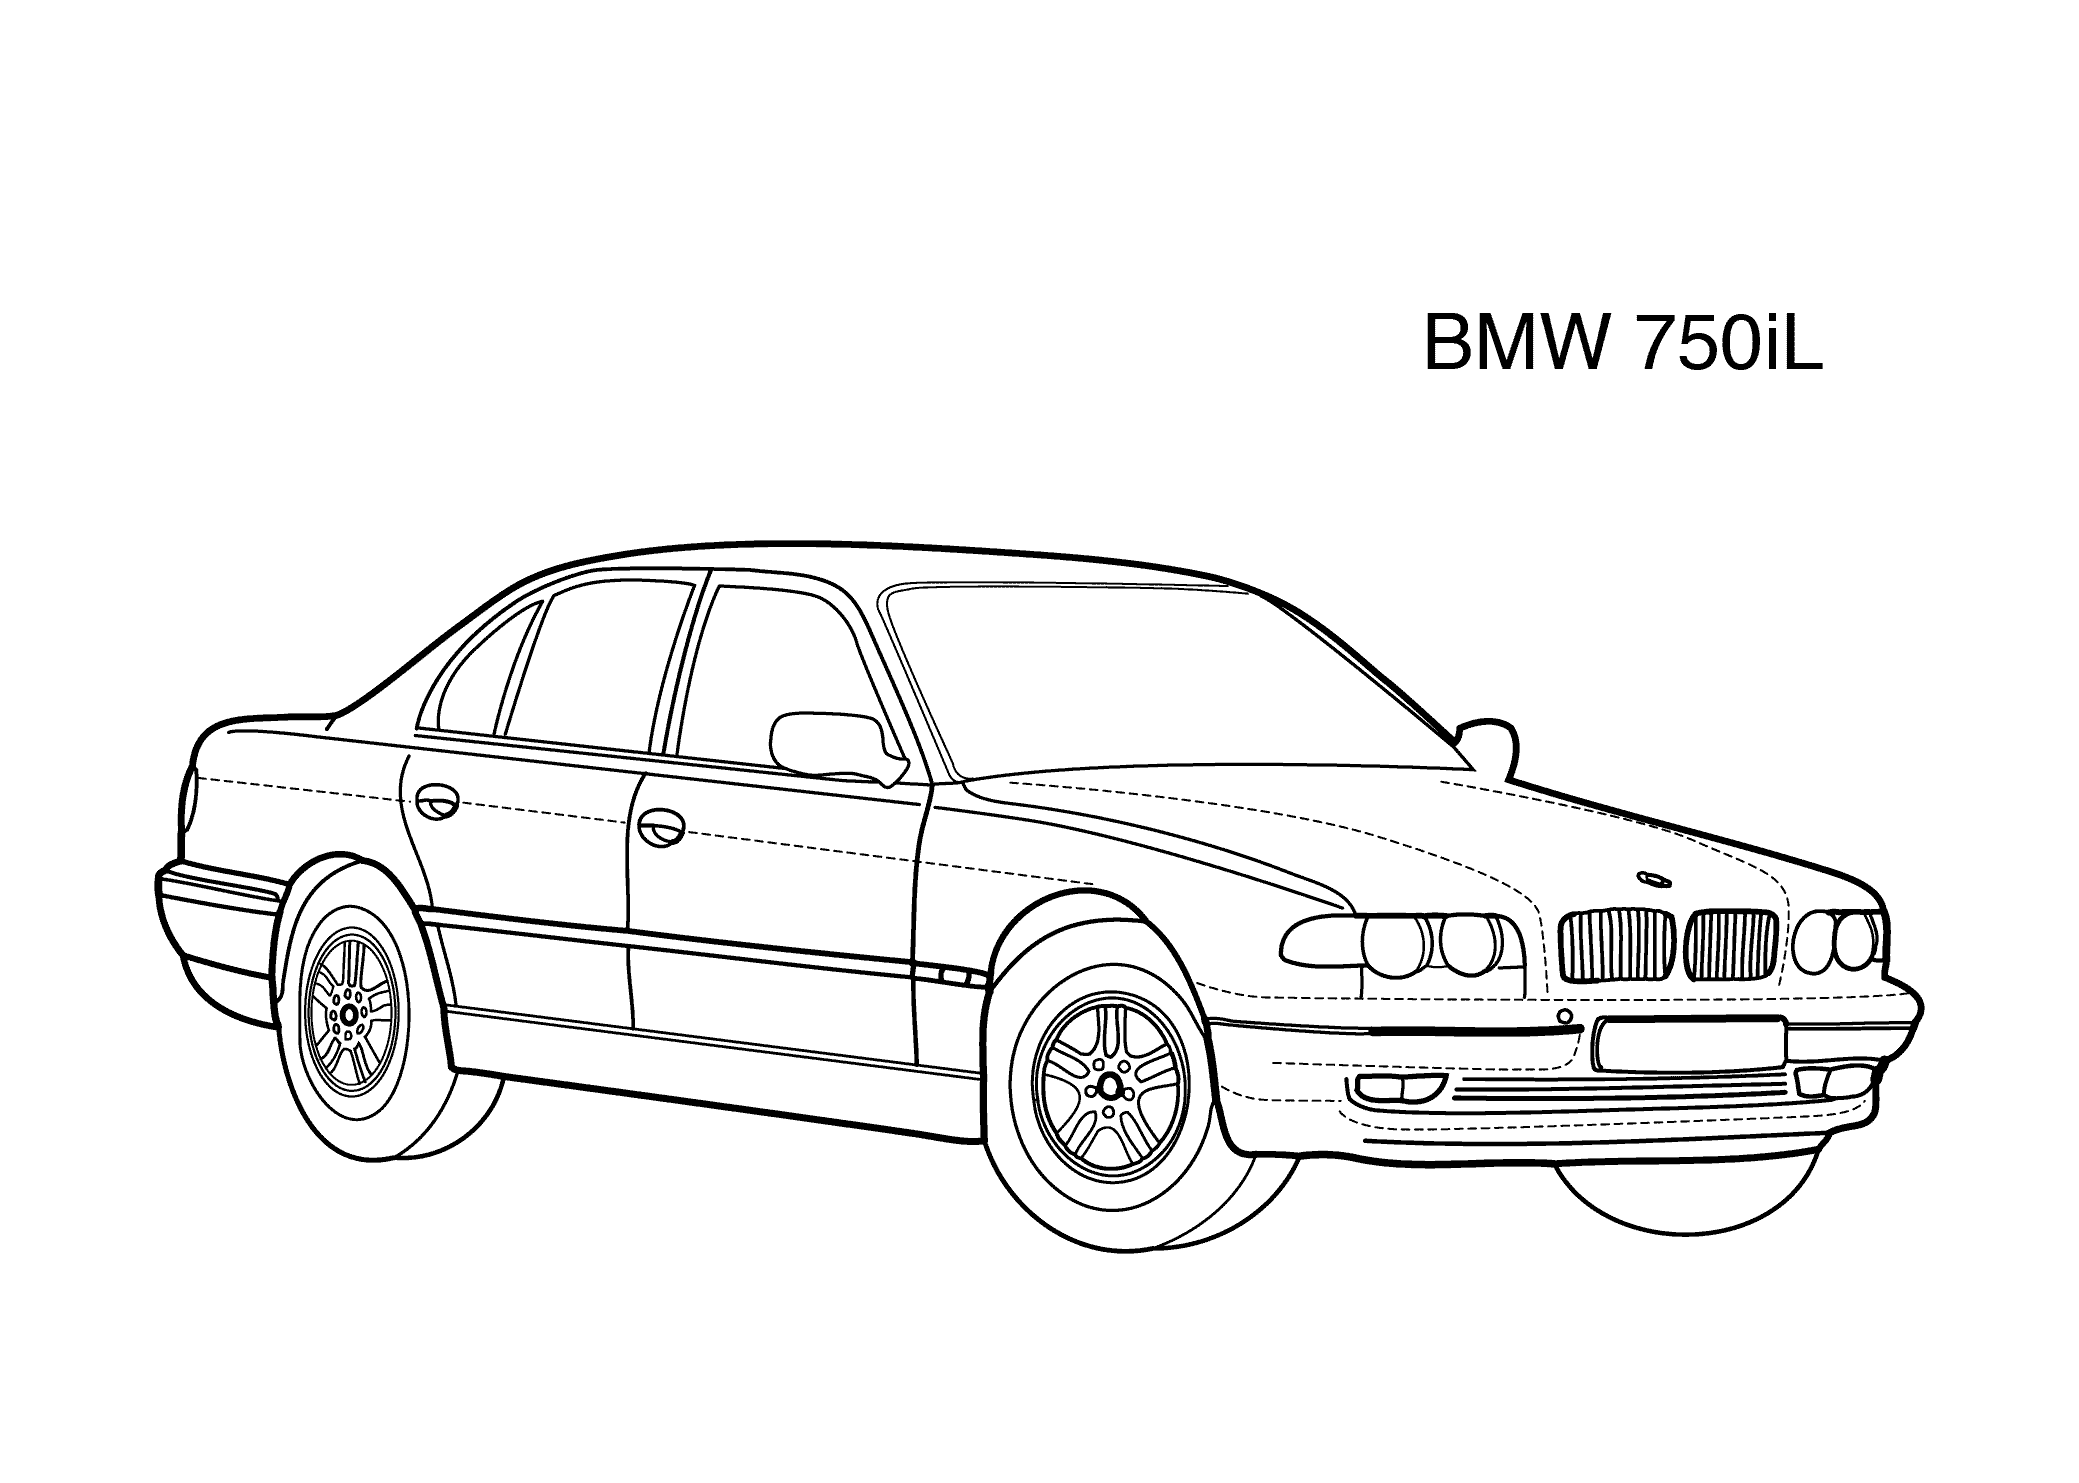 Build A Car Coloring Page - Coloring Pages For All Ages